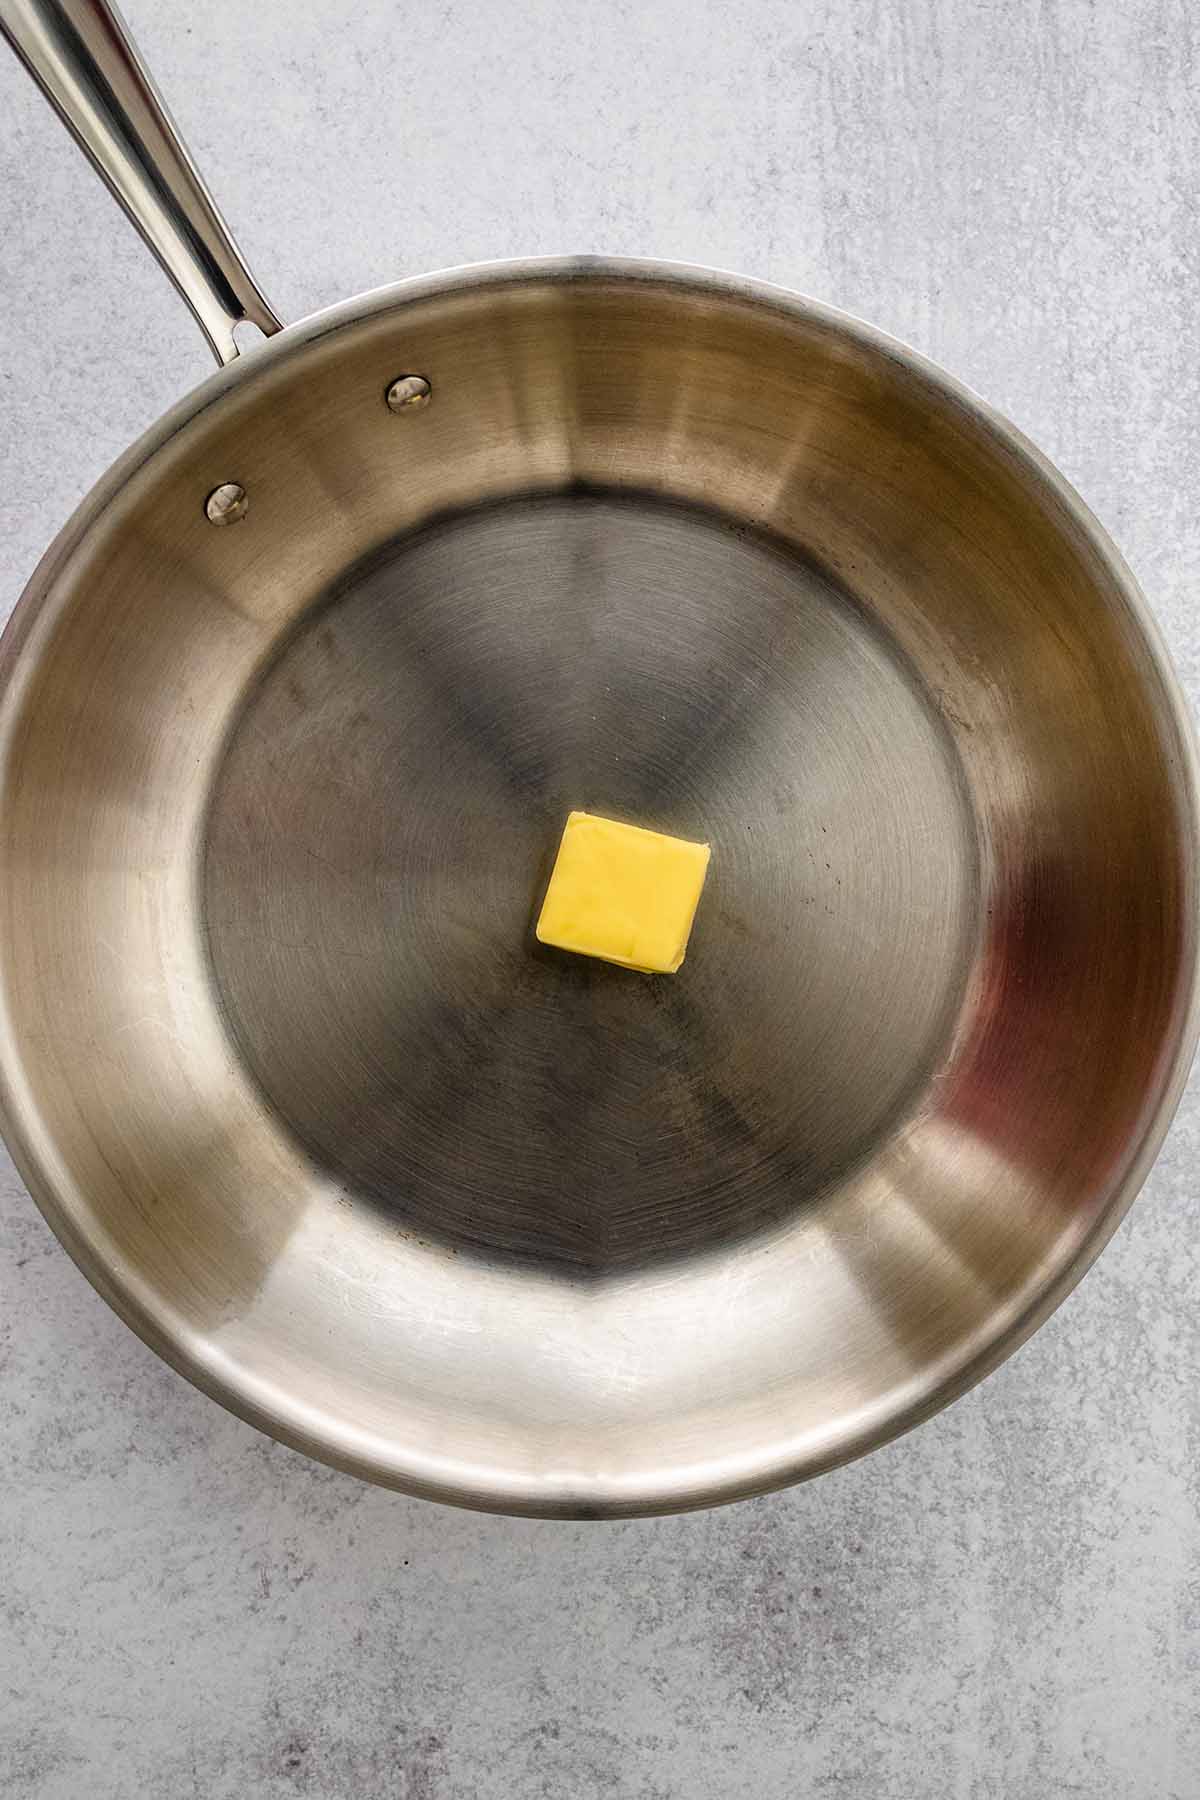 Slab of butter in a stainless steel skillet.